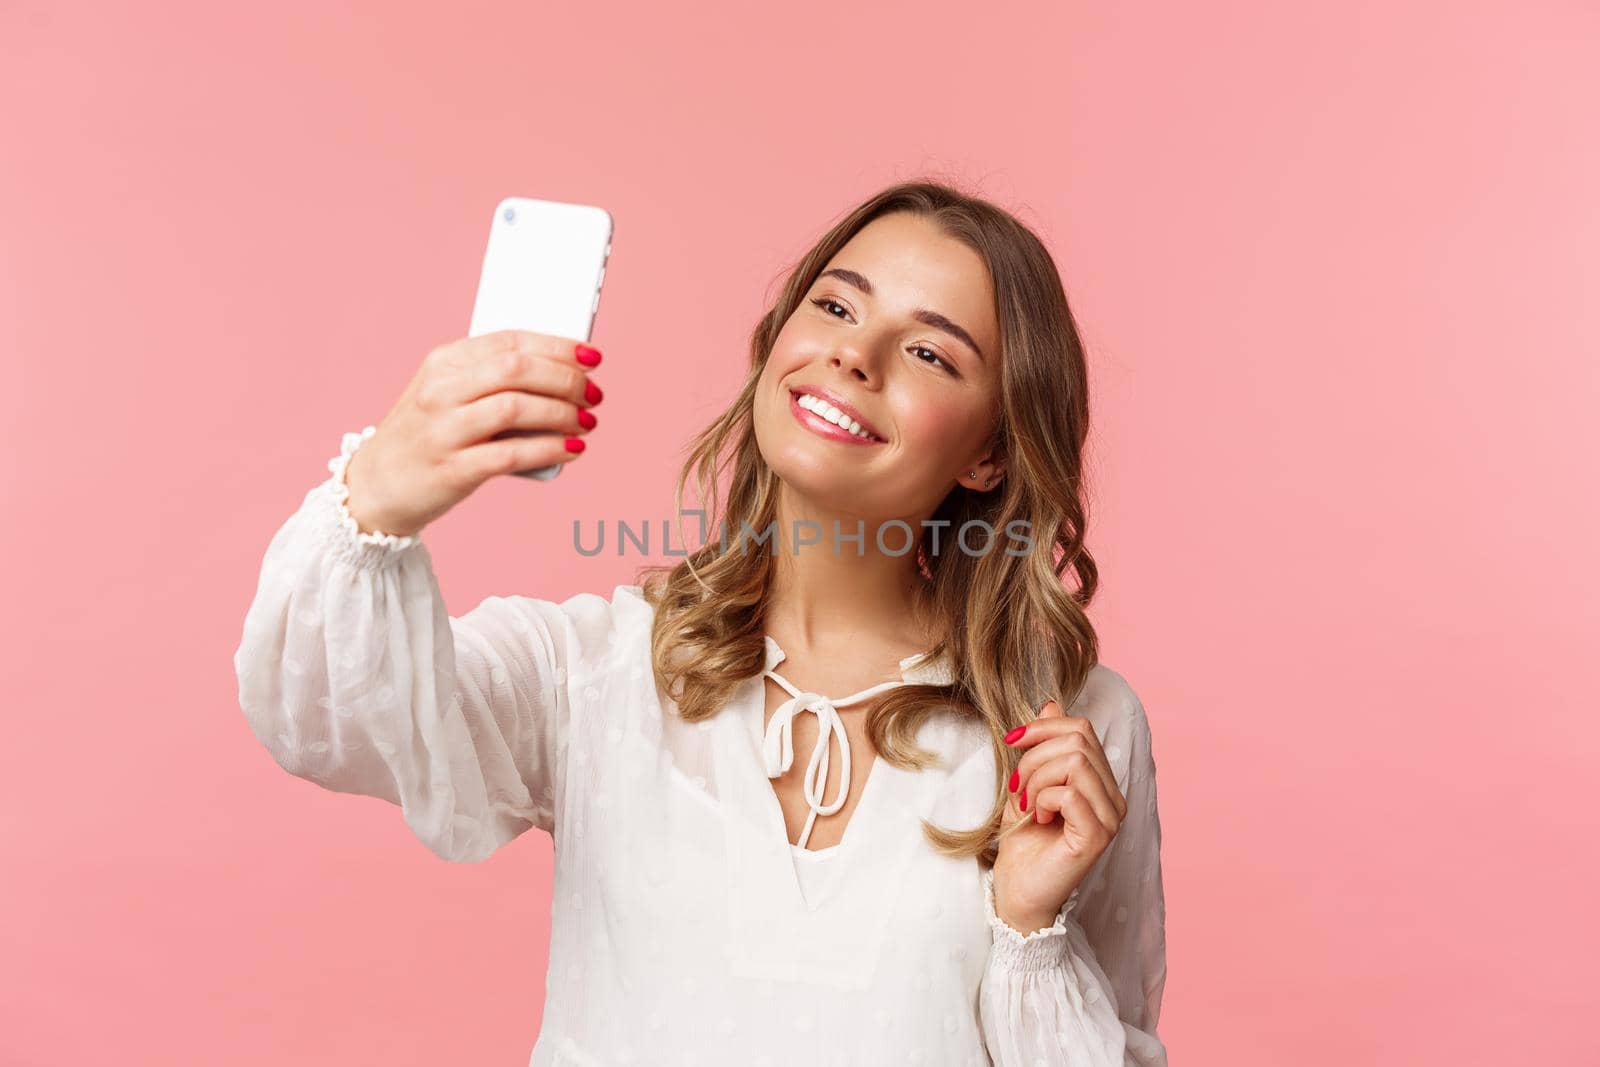 Close-up portrait of beautiful and stylish blond girl taking selfie in park at spring, gather likes and followers, make blogger content, taking photo on smartphone, smiling sassy, pink background.